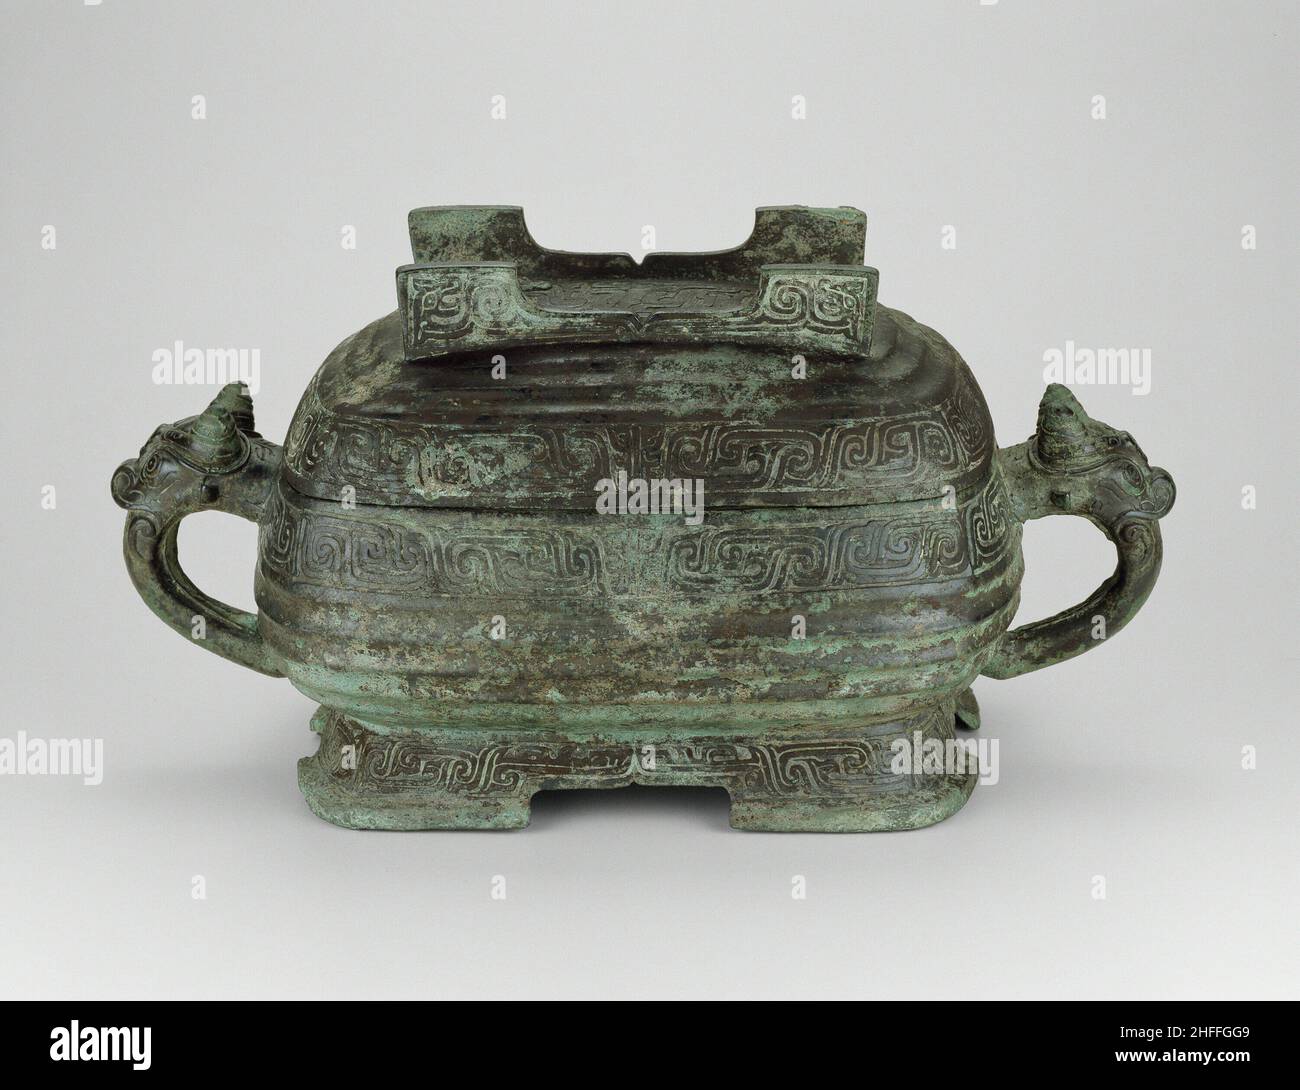 Covered Food Container, Western Zhou dynasty ( 1046-771 BC ), mid-9th century B.C. Stock Photo